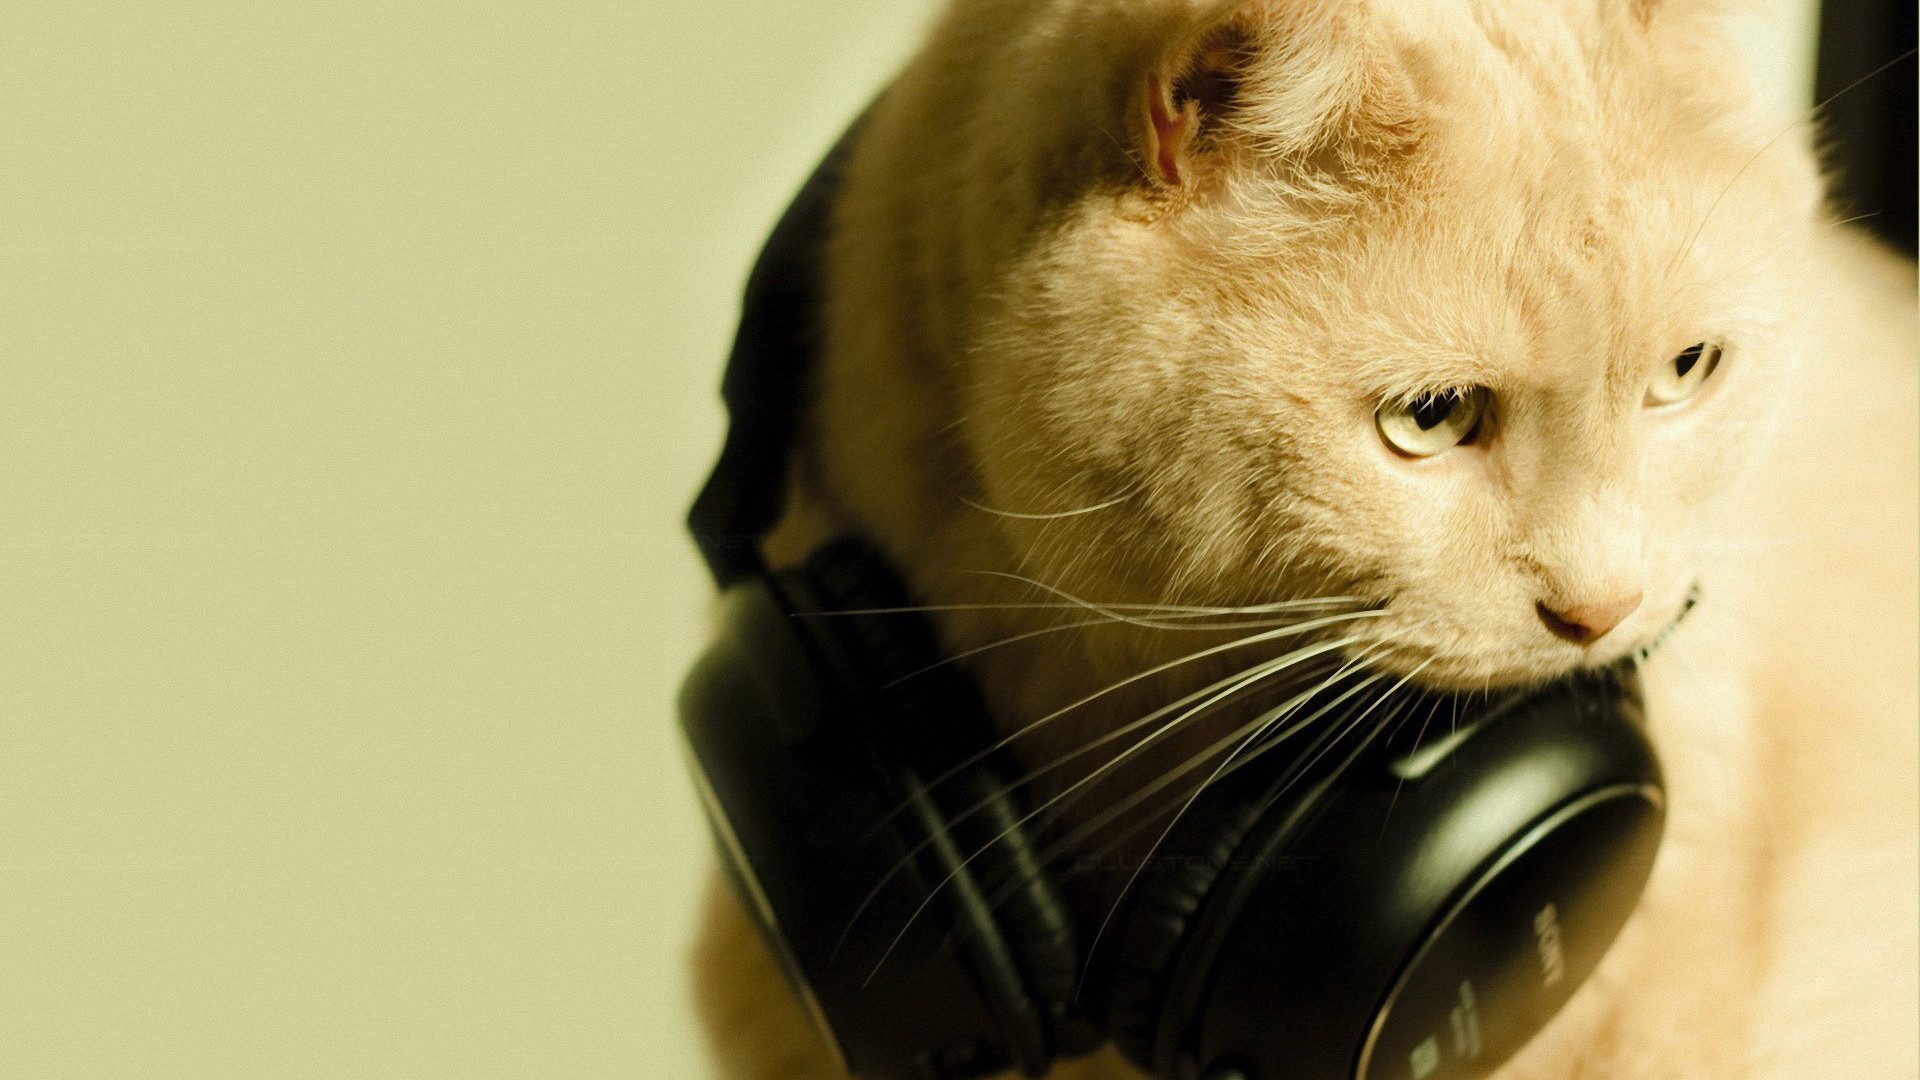 1920x1080 Cat With Headphones Wallpaper - Wallnest Picture on VisualizeUs - Bookmark  pictures and videos that inspire you. Social bookmarking of pictures and  videos.